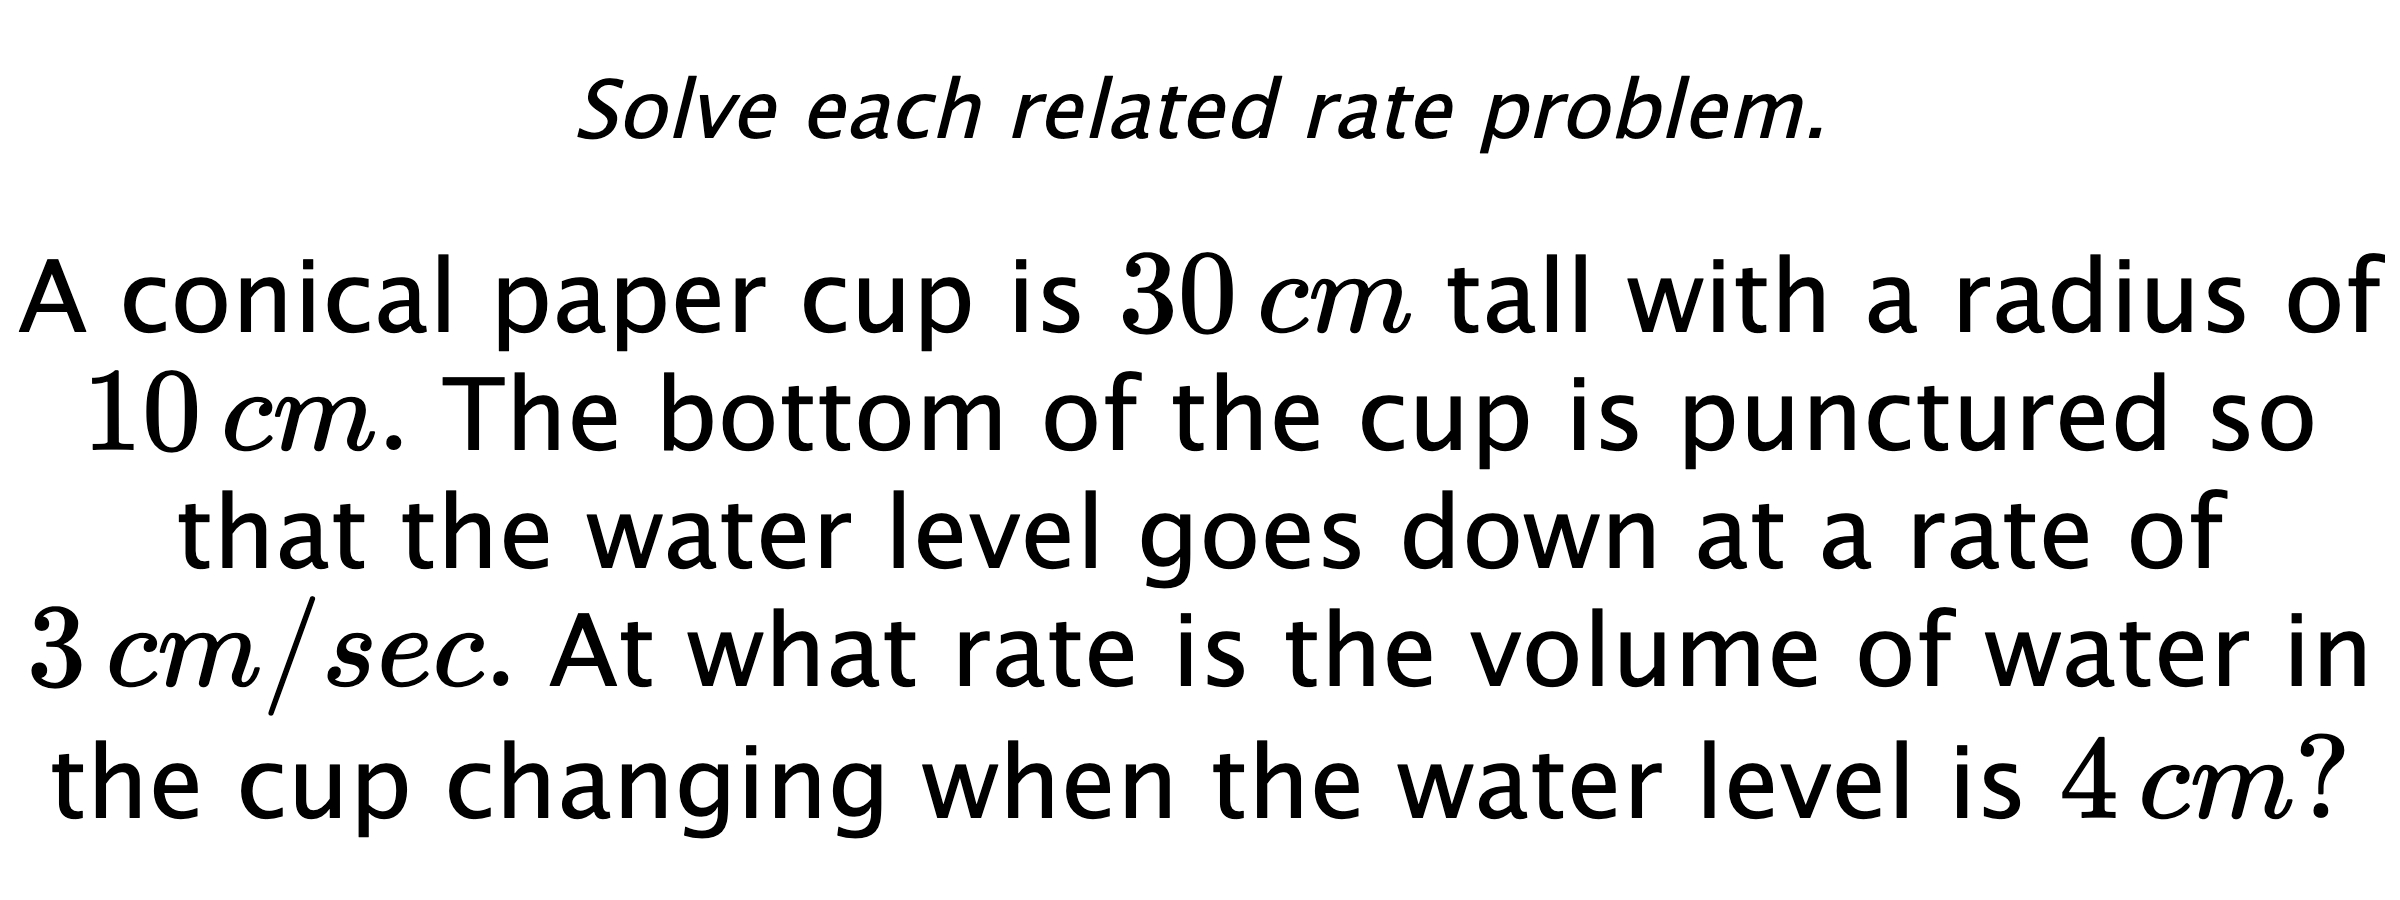 Solve each related rate problem. A conical paper cup is $30\,cm$ tall with a radius of $10\,cm.$ The bottom of the cup is punctured so that the water level goes down at a rate of $3\,cm/sec.$ At what rate is the volume of water in the cup changing when the water level is $4\,cm?$